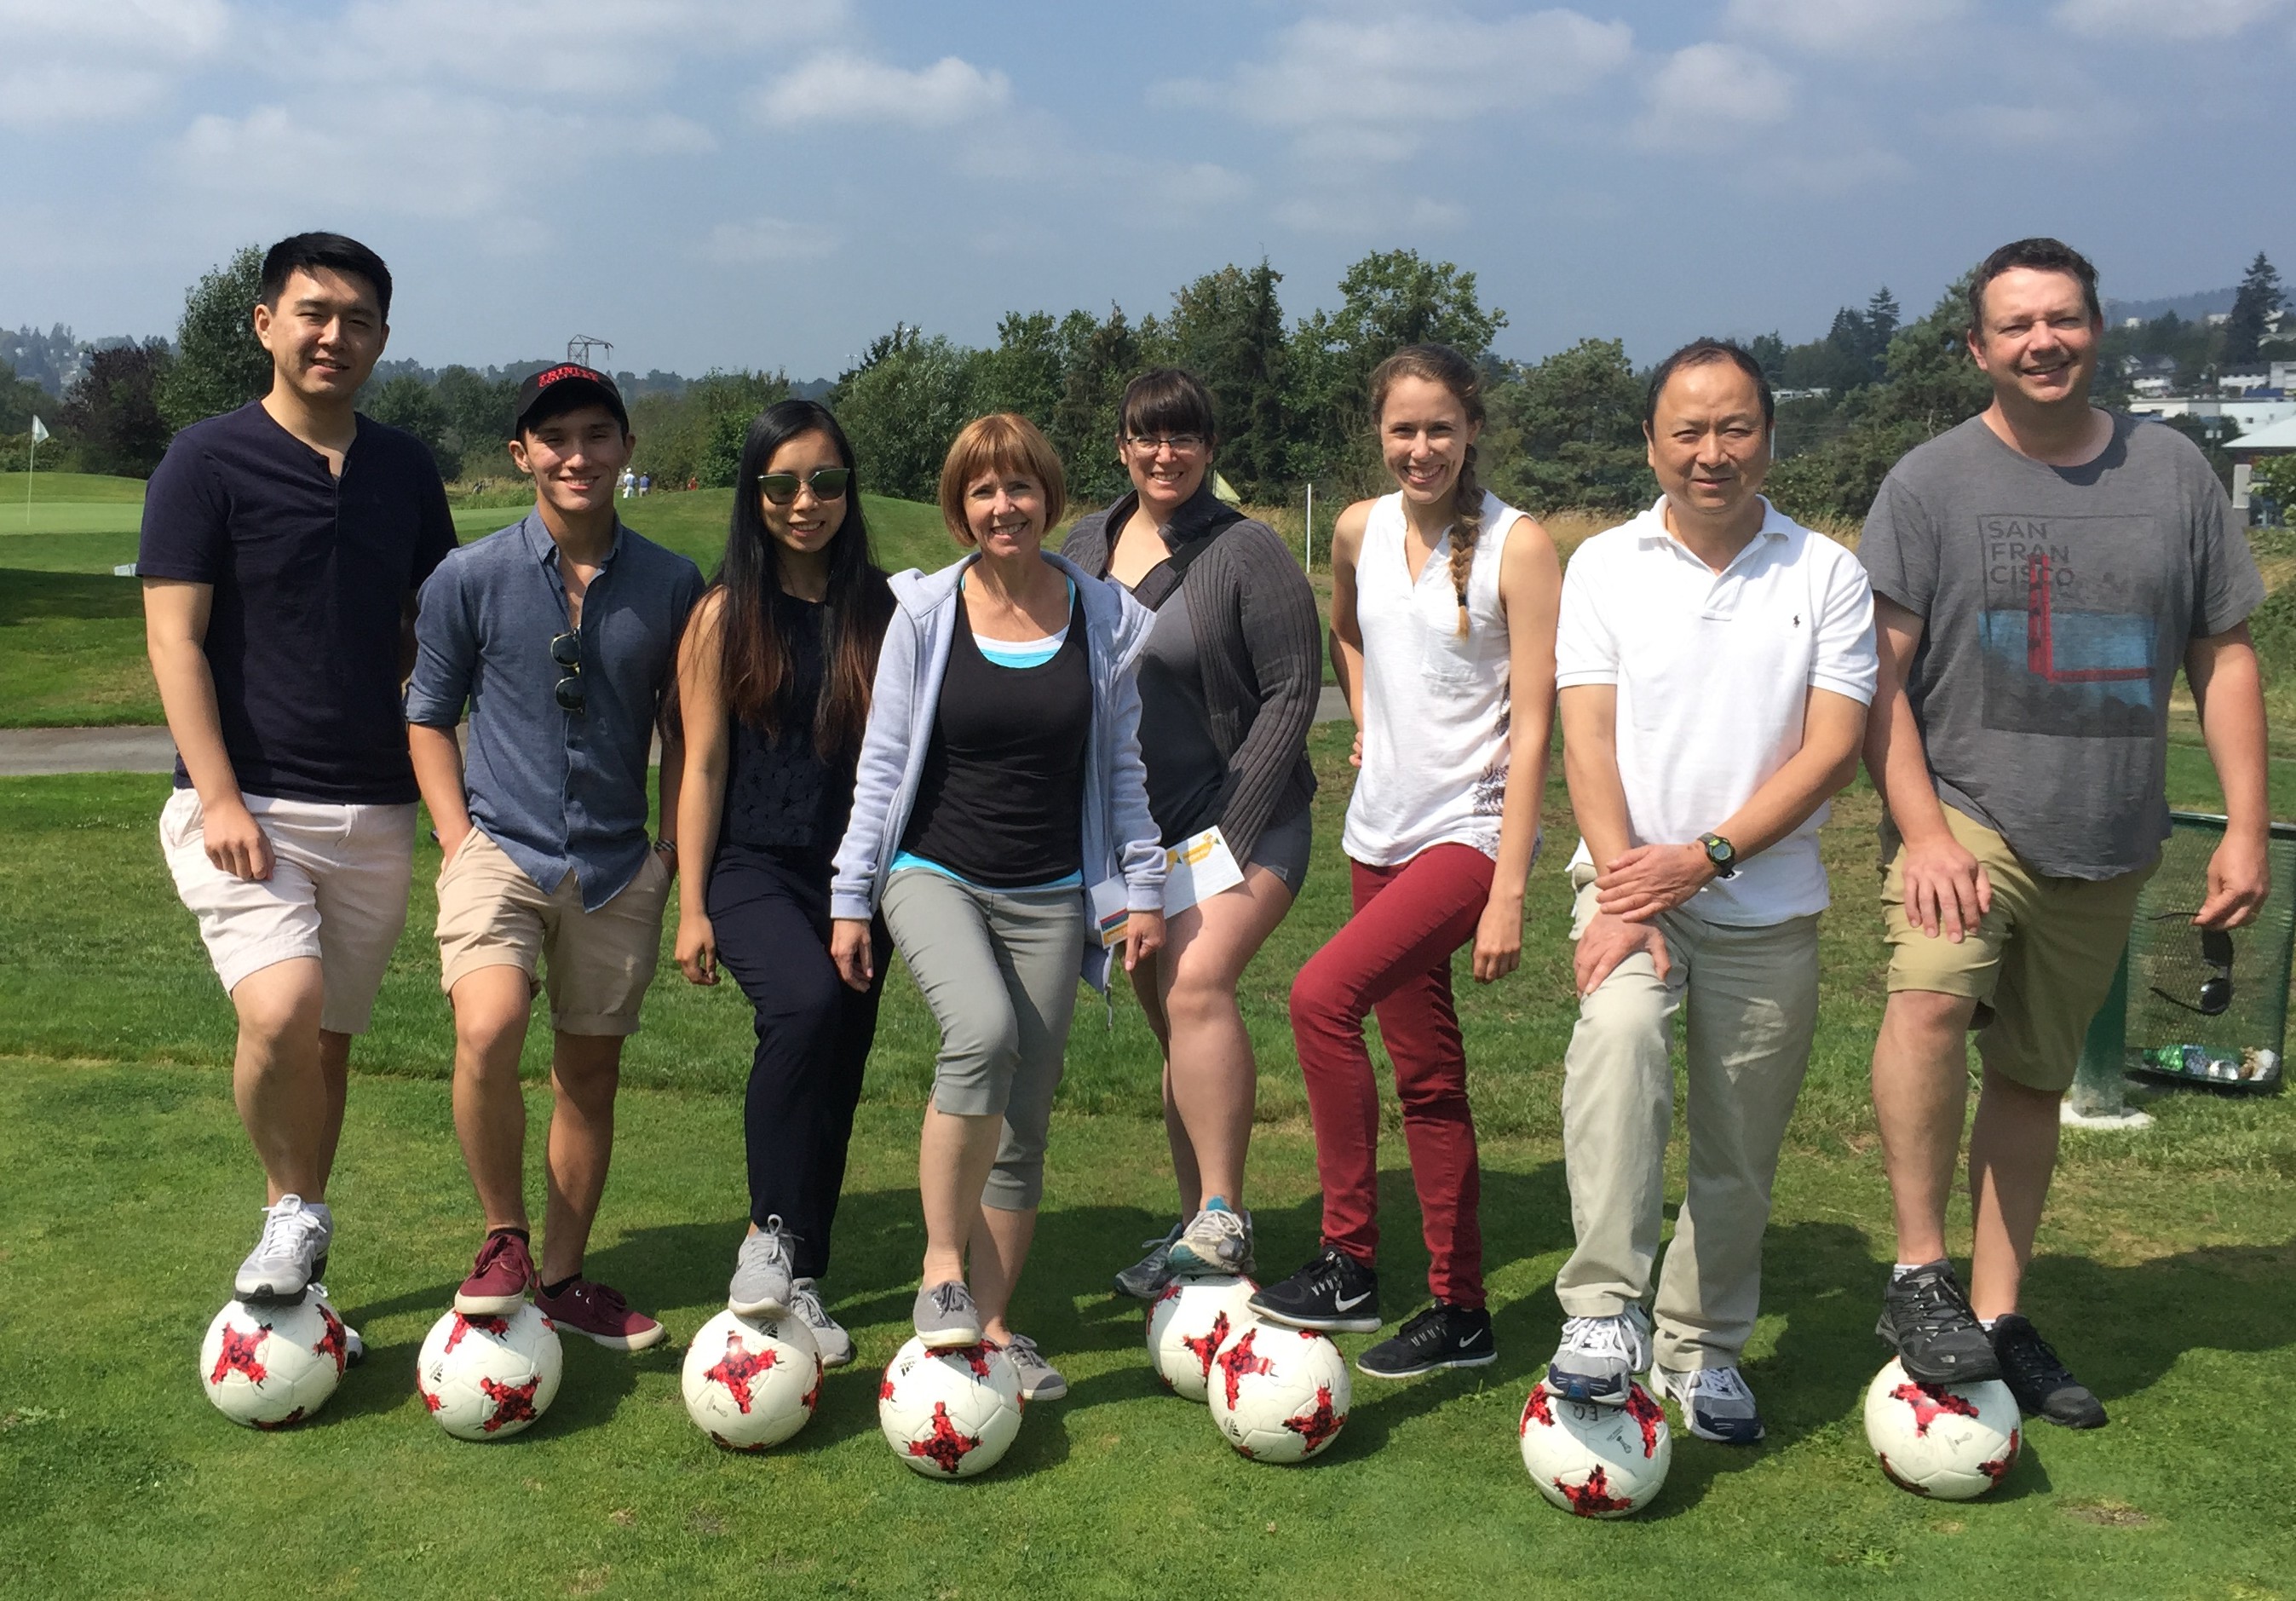 Foot golf in Coquitlam, August 2018